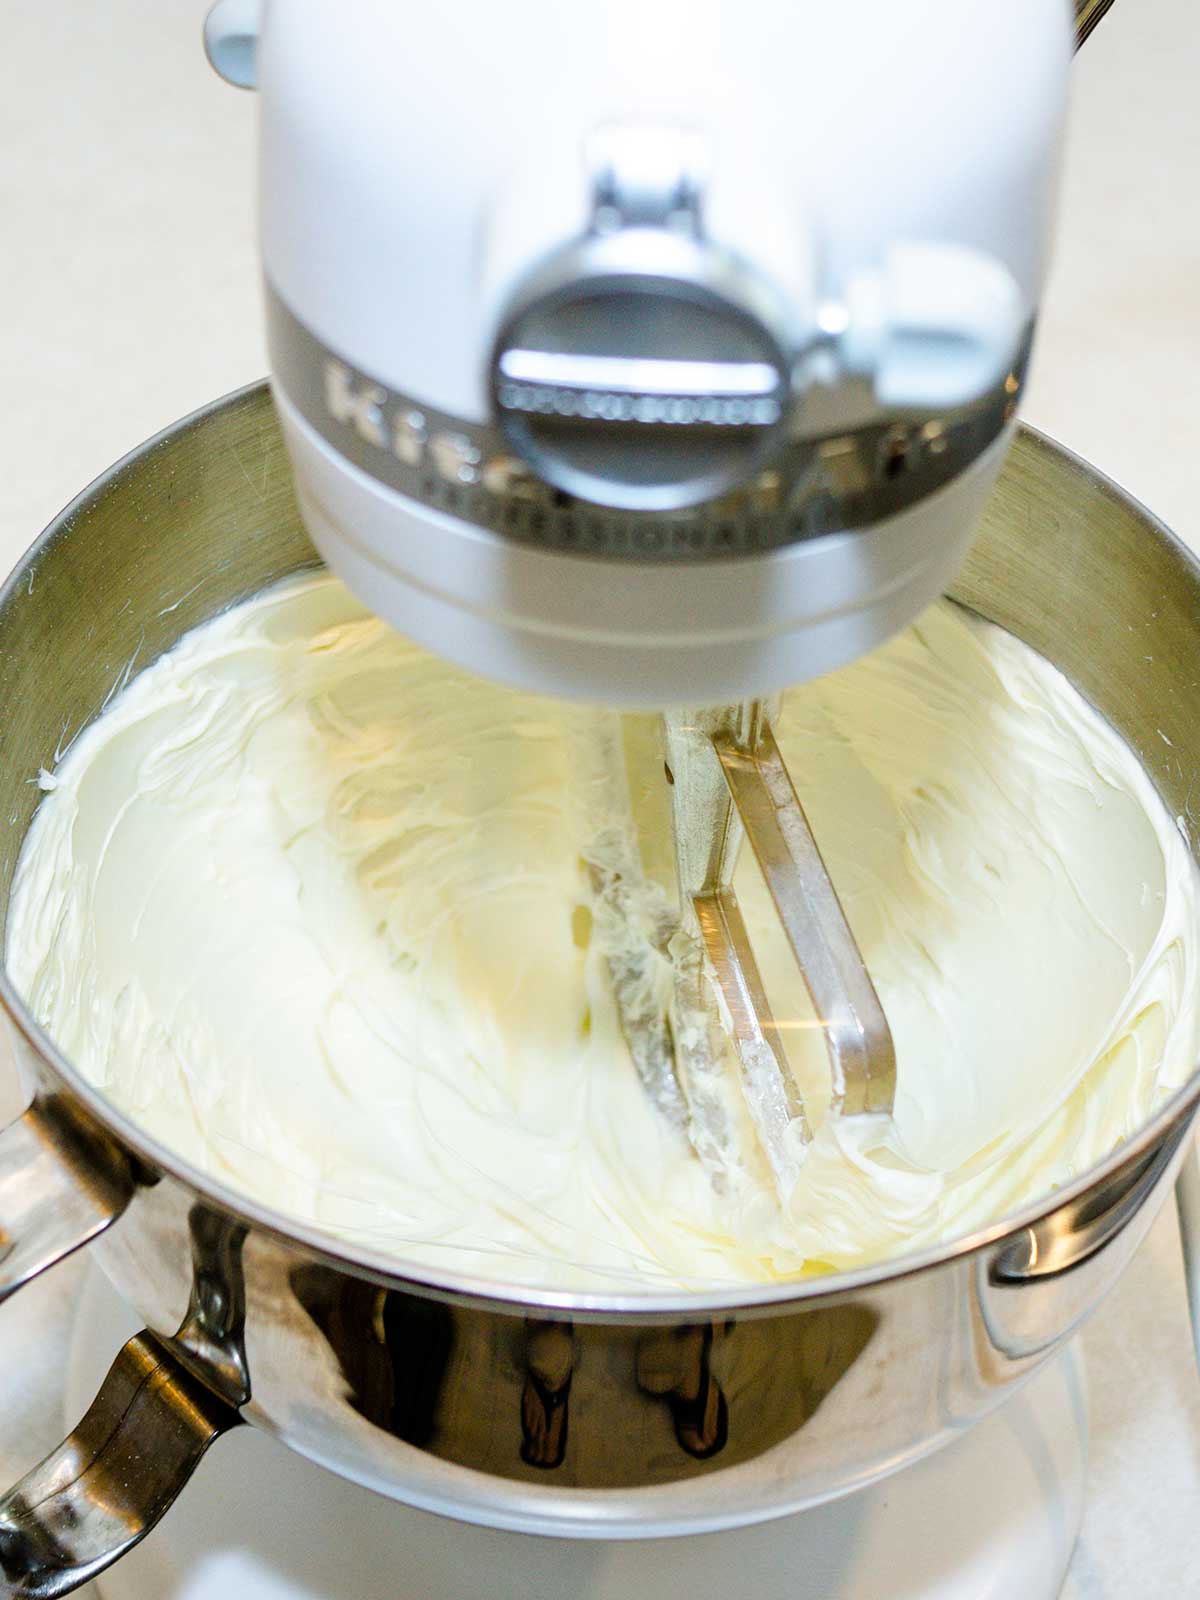 Beating cream cheese in stand mixer.